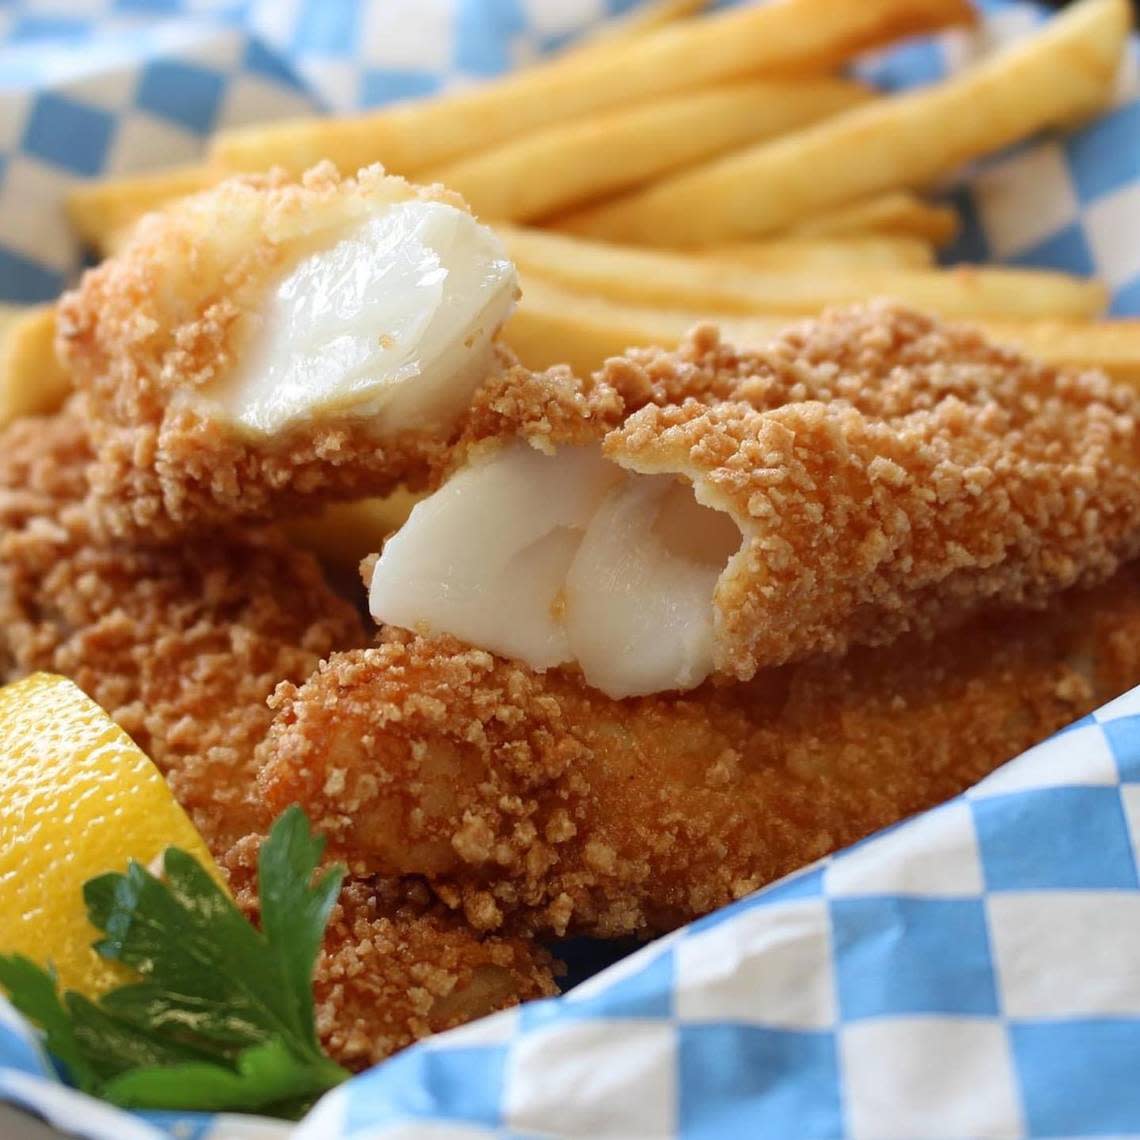 Captain’s Cod Company is a rolling food truck making stops all over Washington with fresh-from-the-sea fried fish and chips. Captain's Cod Company/Courtesy to McClatchy